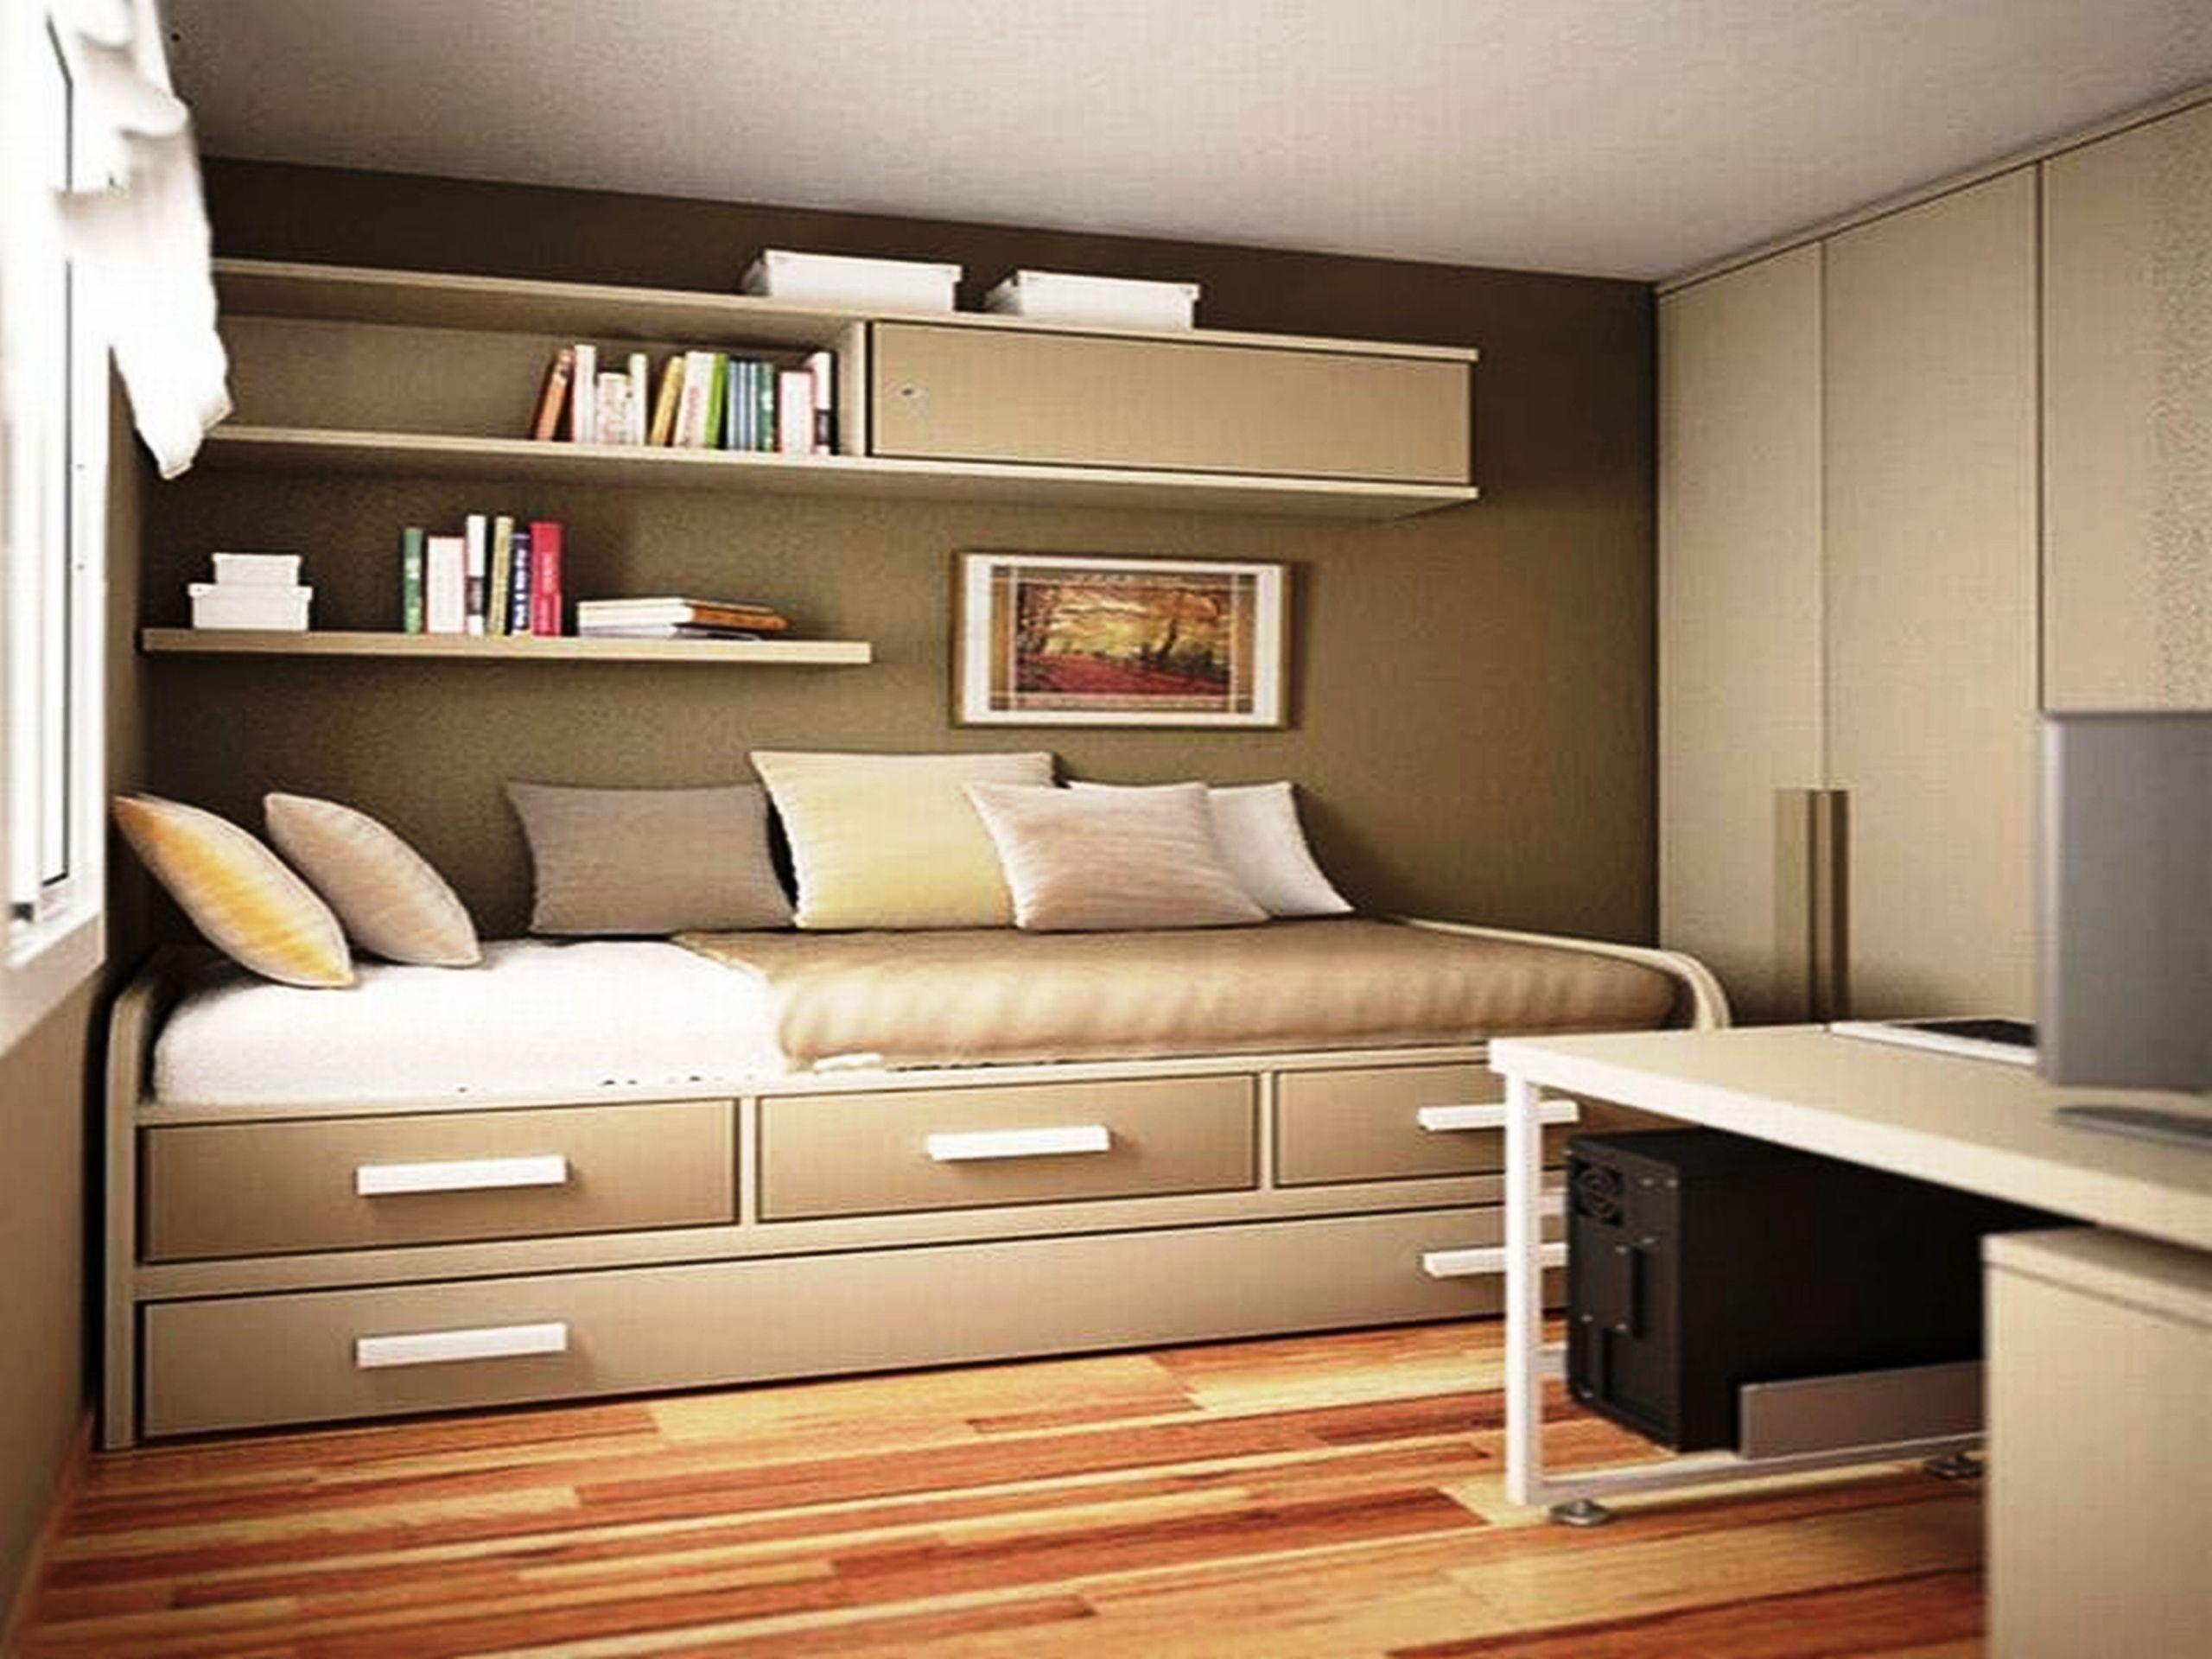 Ikea Small Bedroom
 Ikea bedroom furniture for small spaces